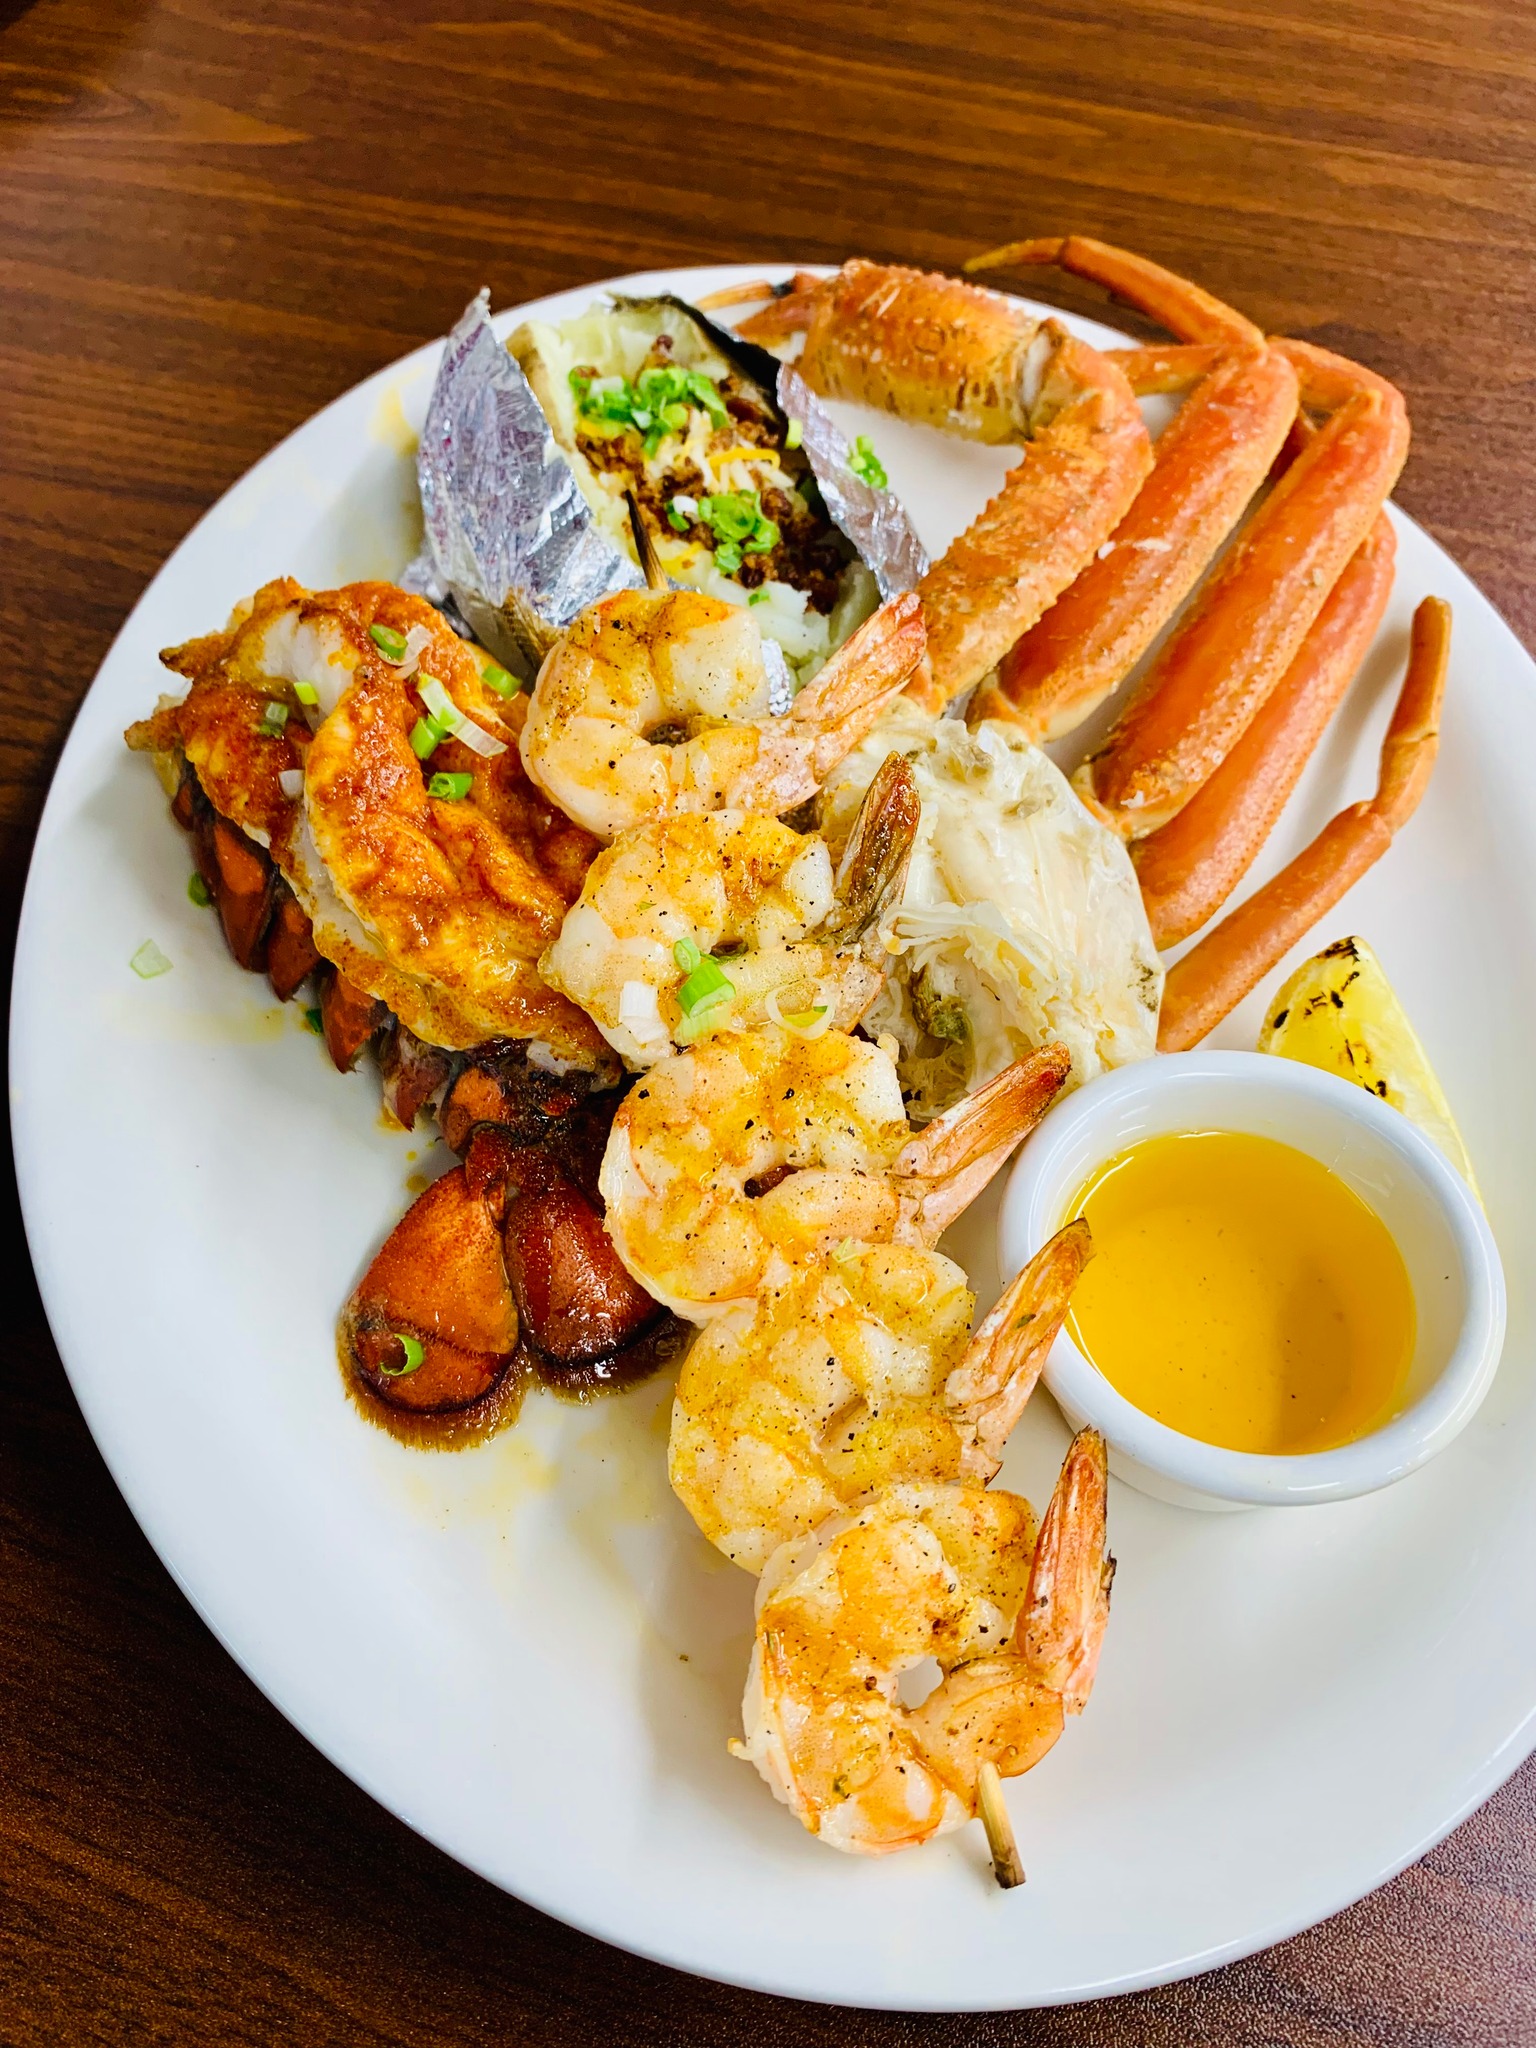 A shrimp and crab leg dish with a loaded baked potato on the side.